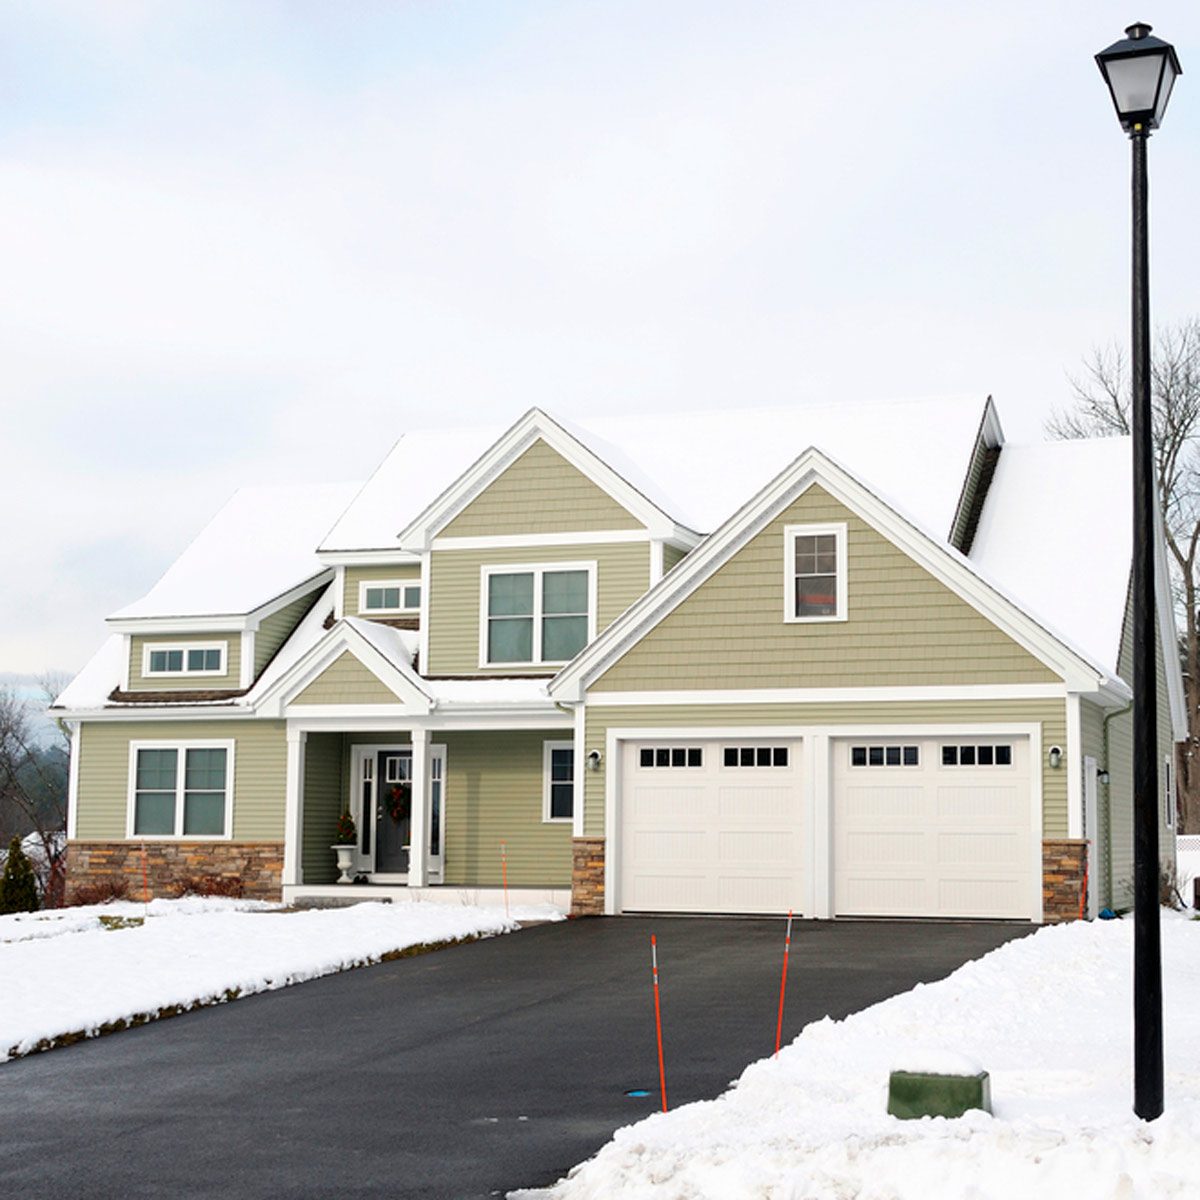 A Heated Driveway: Is It Actually Worth It?